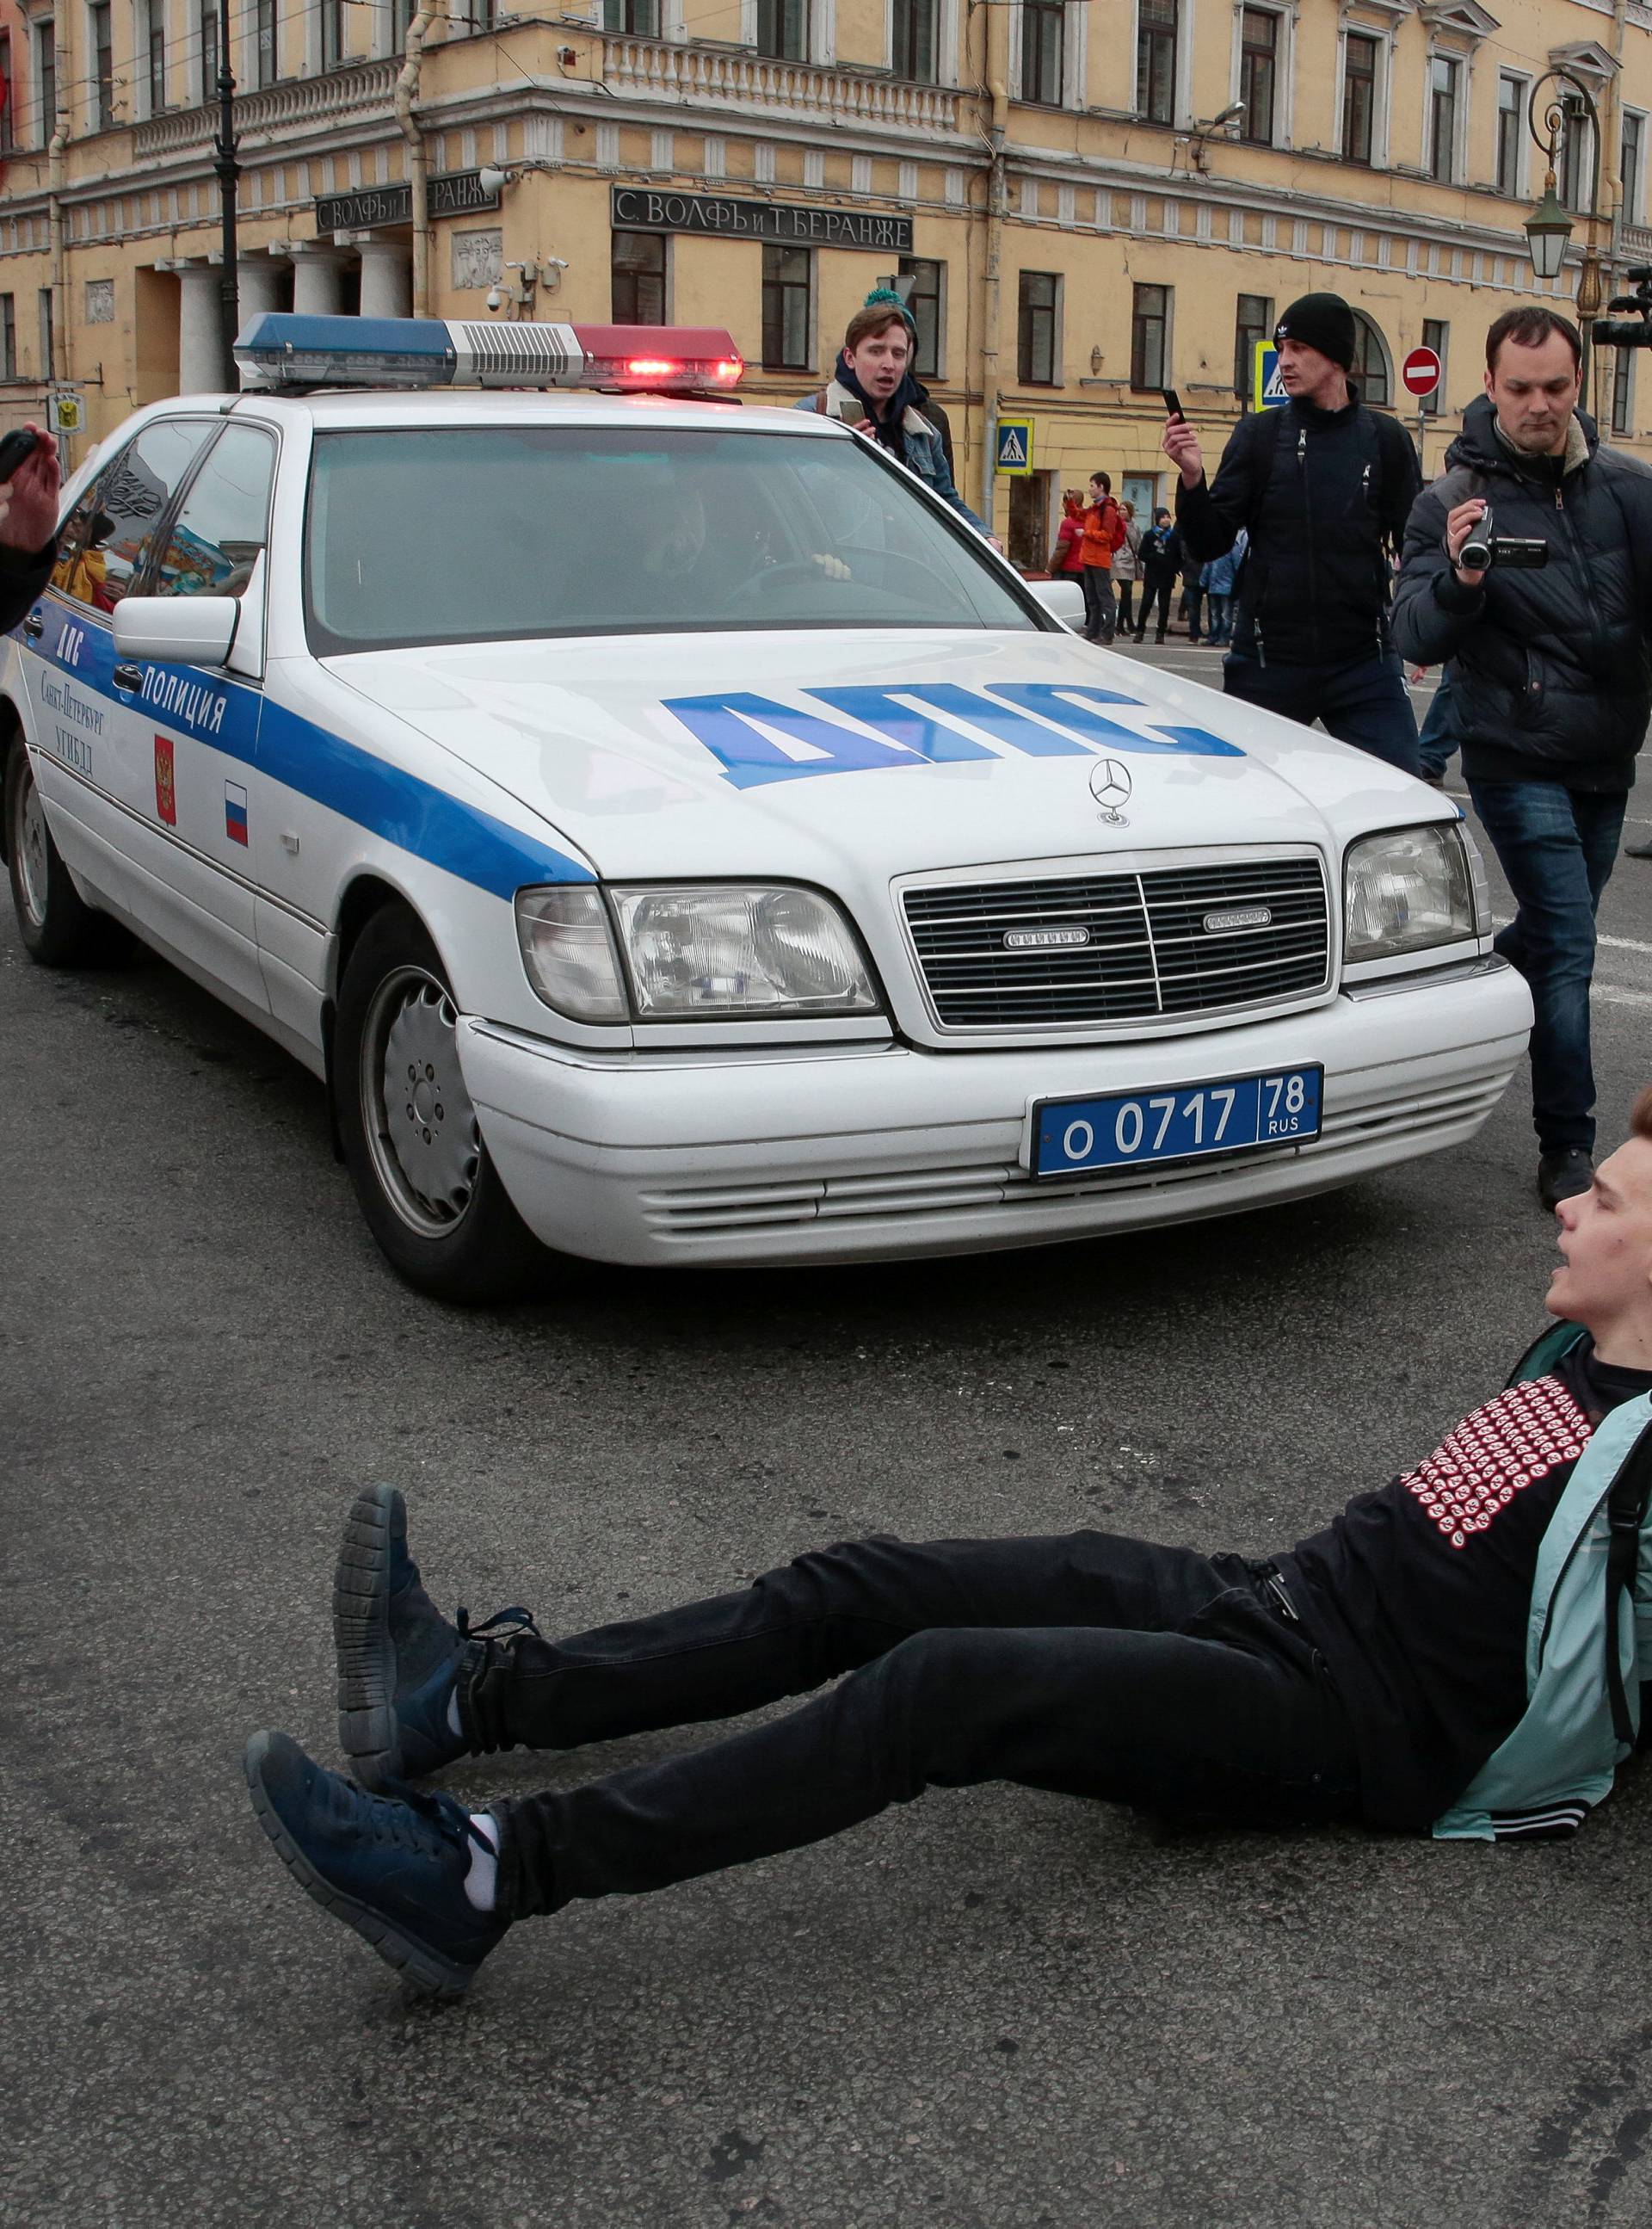 An opposition supporter tries to block a police car during a protest ahead of President Vladimir Putin's inauguration ceremony, Saint Petersburg